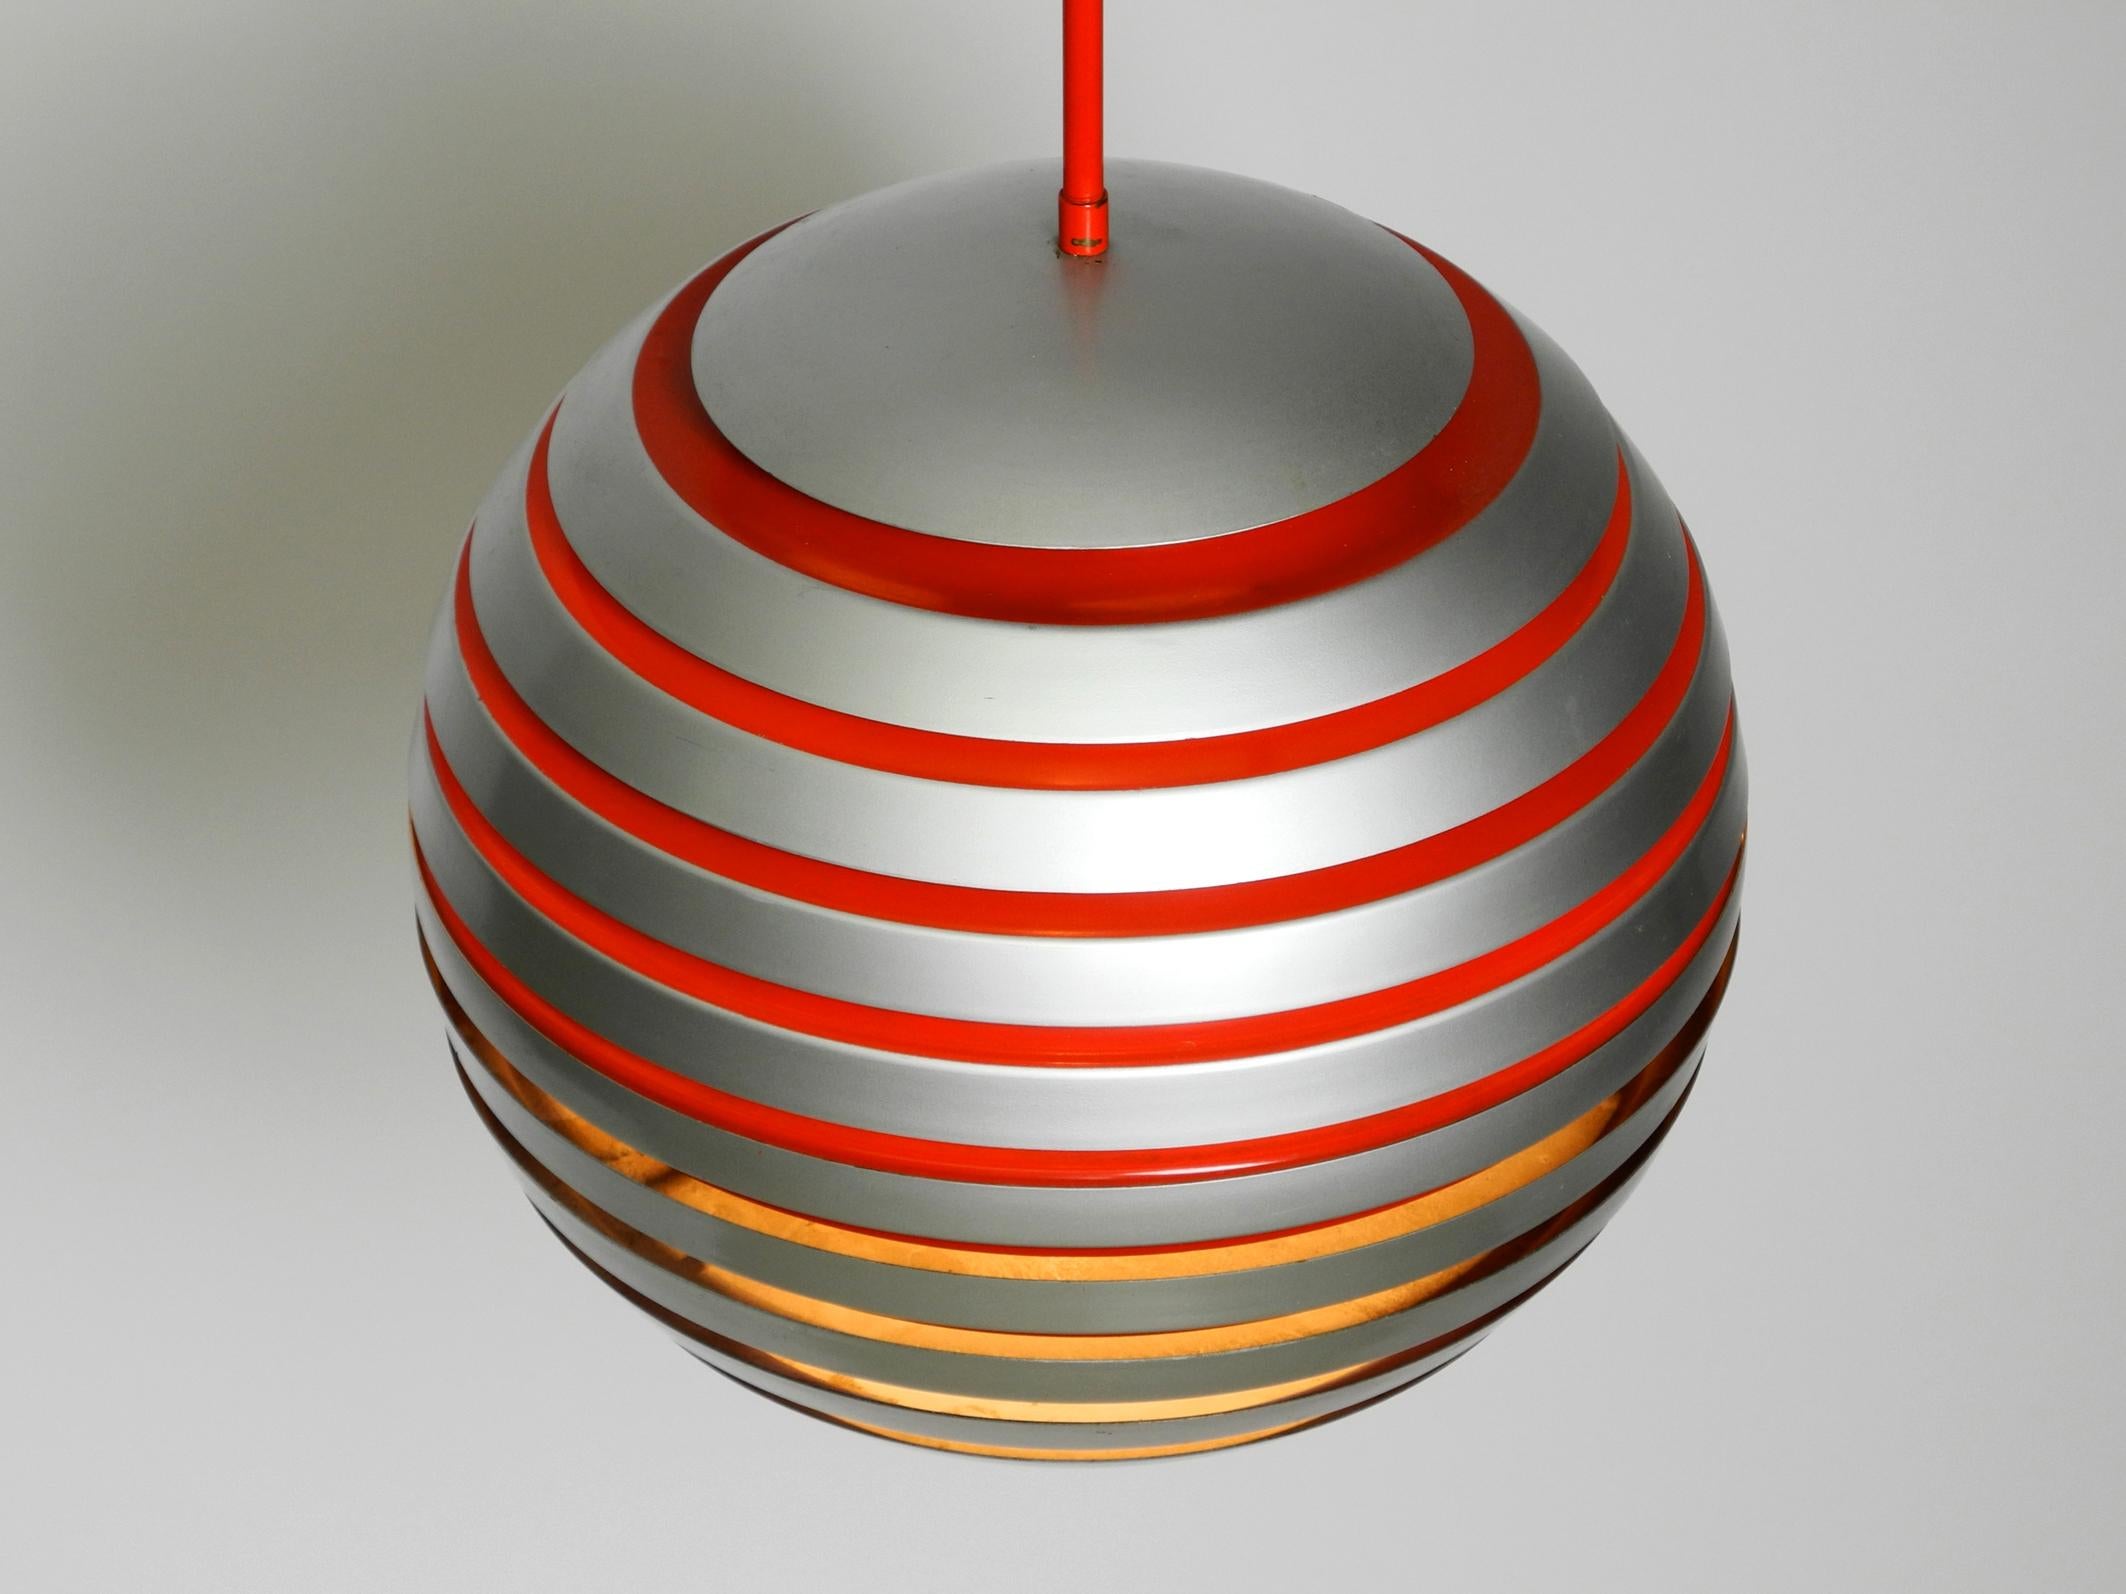 Beautiful original 1960s ball ceiling lamp with slats.
Great Space Age design from a Scandinavian production.
Heavy metal shade is assembled by individual rings.
The individual rings are partly painted red on the inside.
One E27 socket. The cord